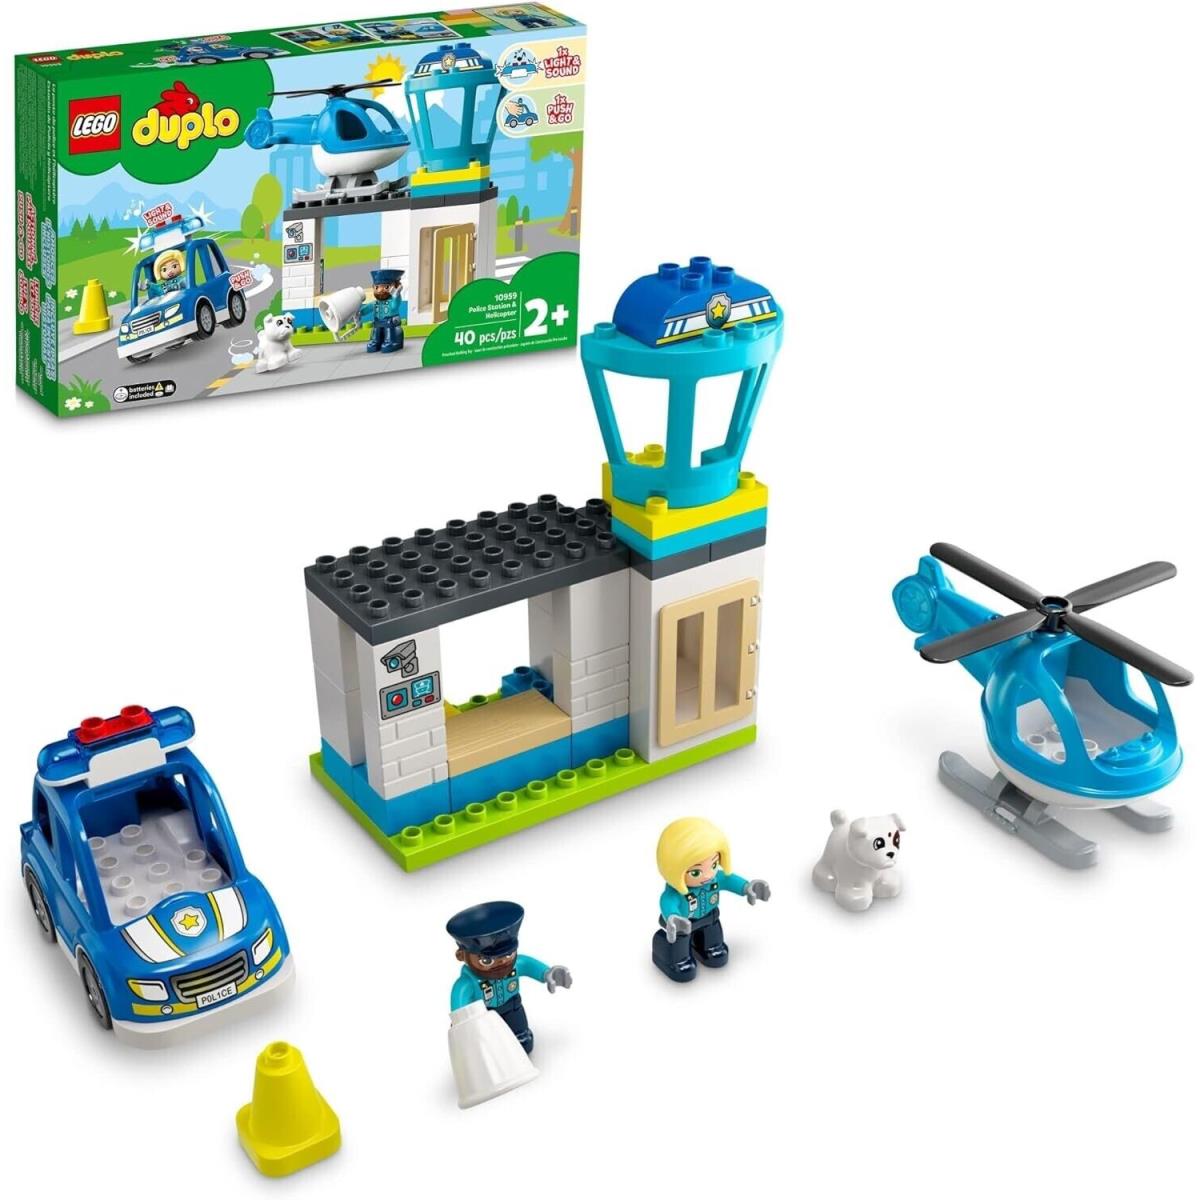 Lego Duplo Town Police Station Helicopter 10959 Building Toy Set